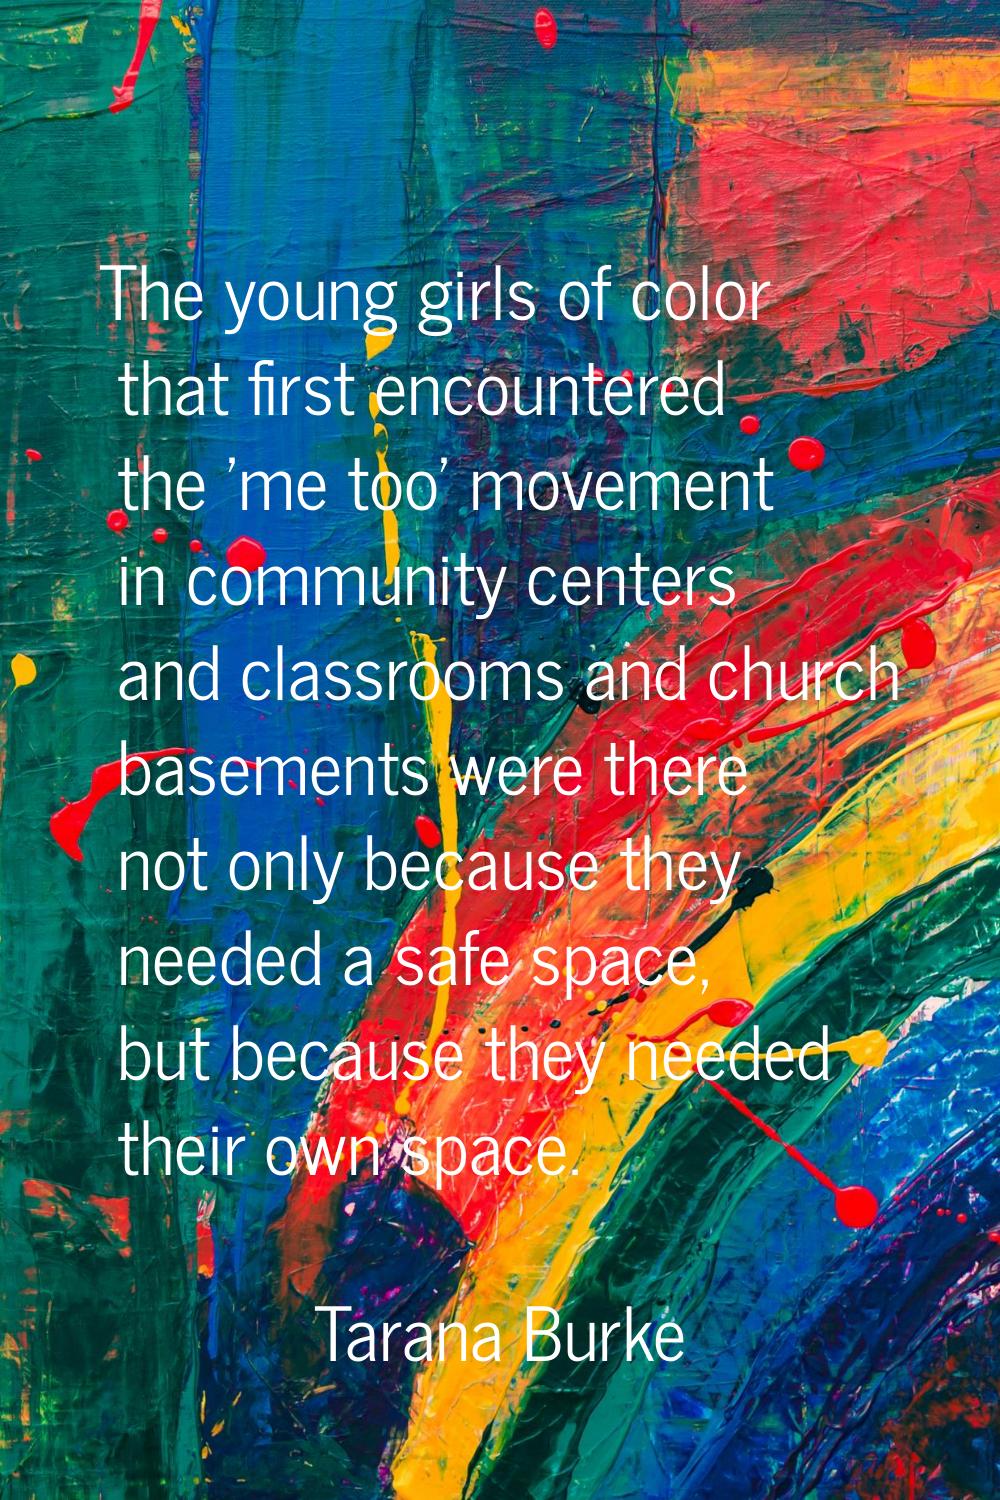 The young girls of color that first encountered the 'me too' movement in community centers and clas